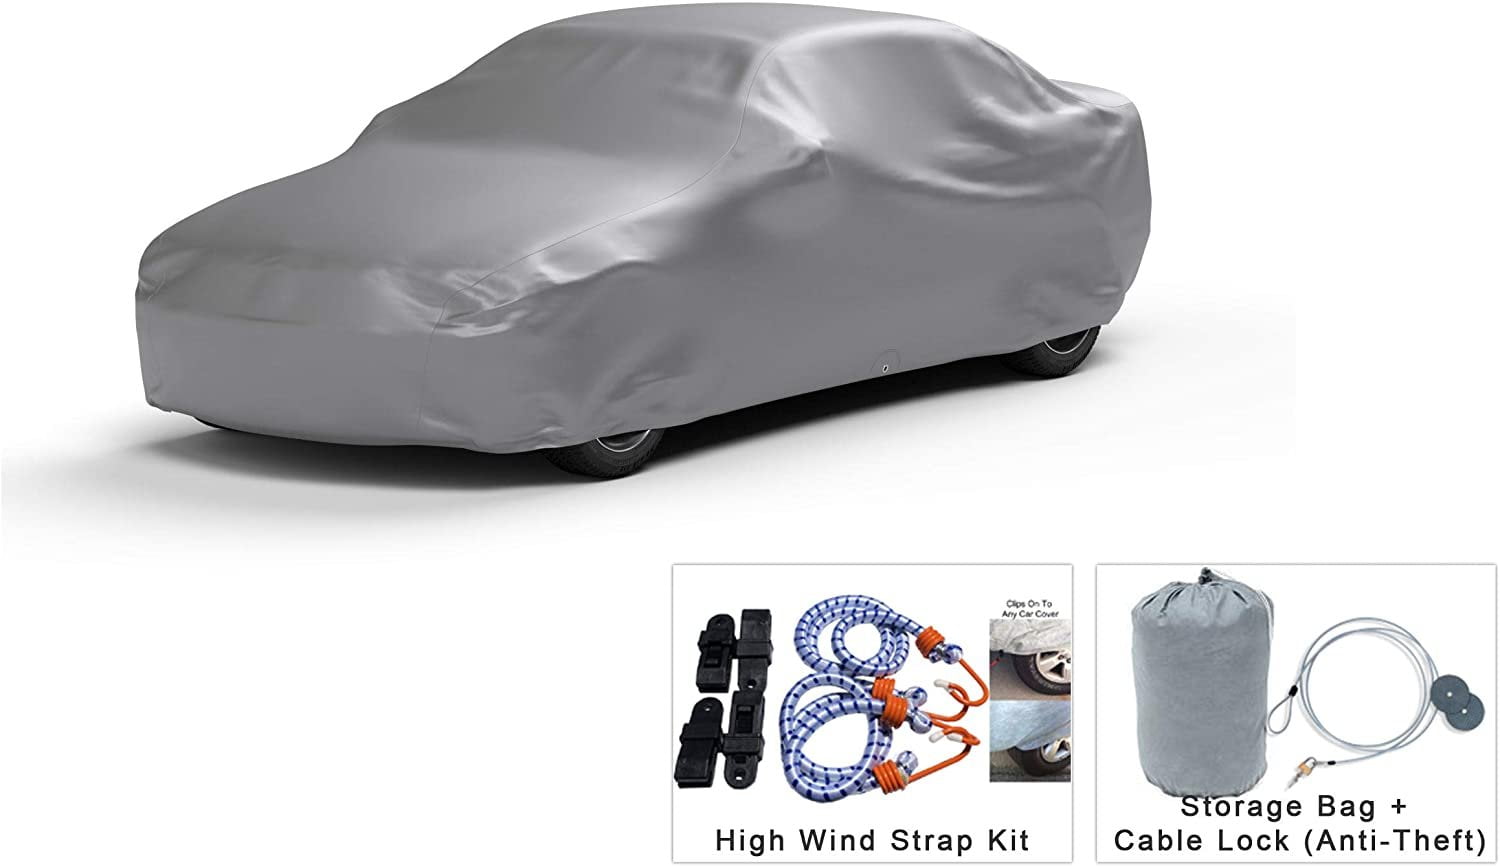 Full Car Cover Waterproof/Dustproof Full Car Cover for Benz S-Class 2010-2021